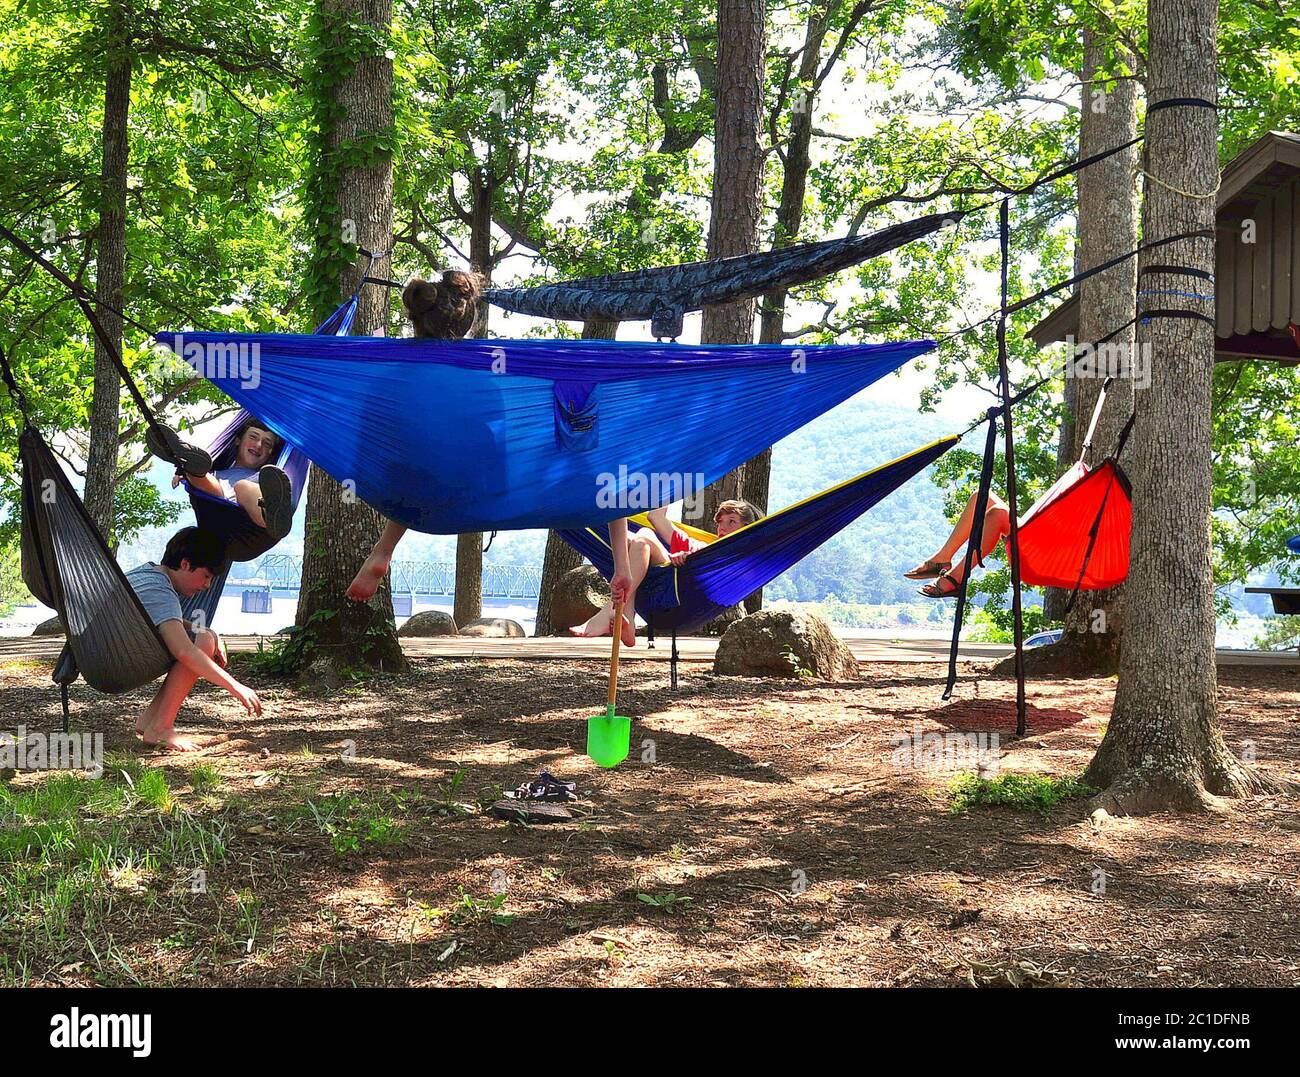 Cartersville, GA-circa May 18, 2019:  Young boys and girls laughing and playing together having fun swinging in hammocks by the lake on Red Top Mounta Stock Photo